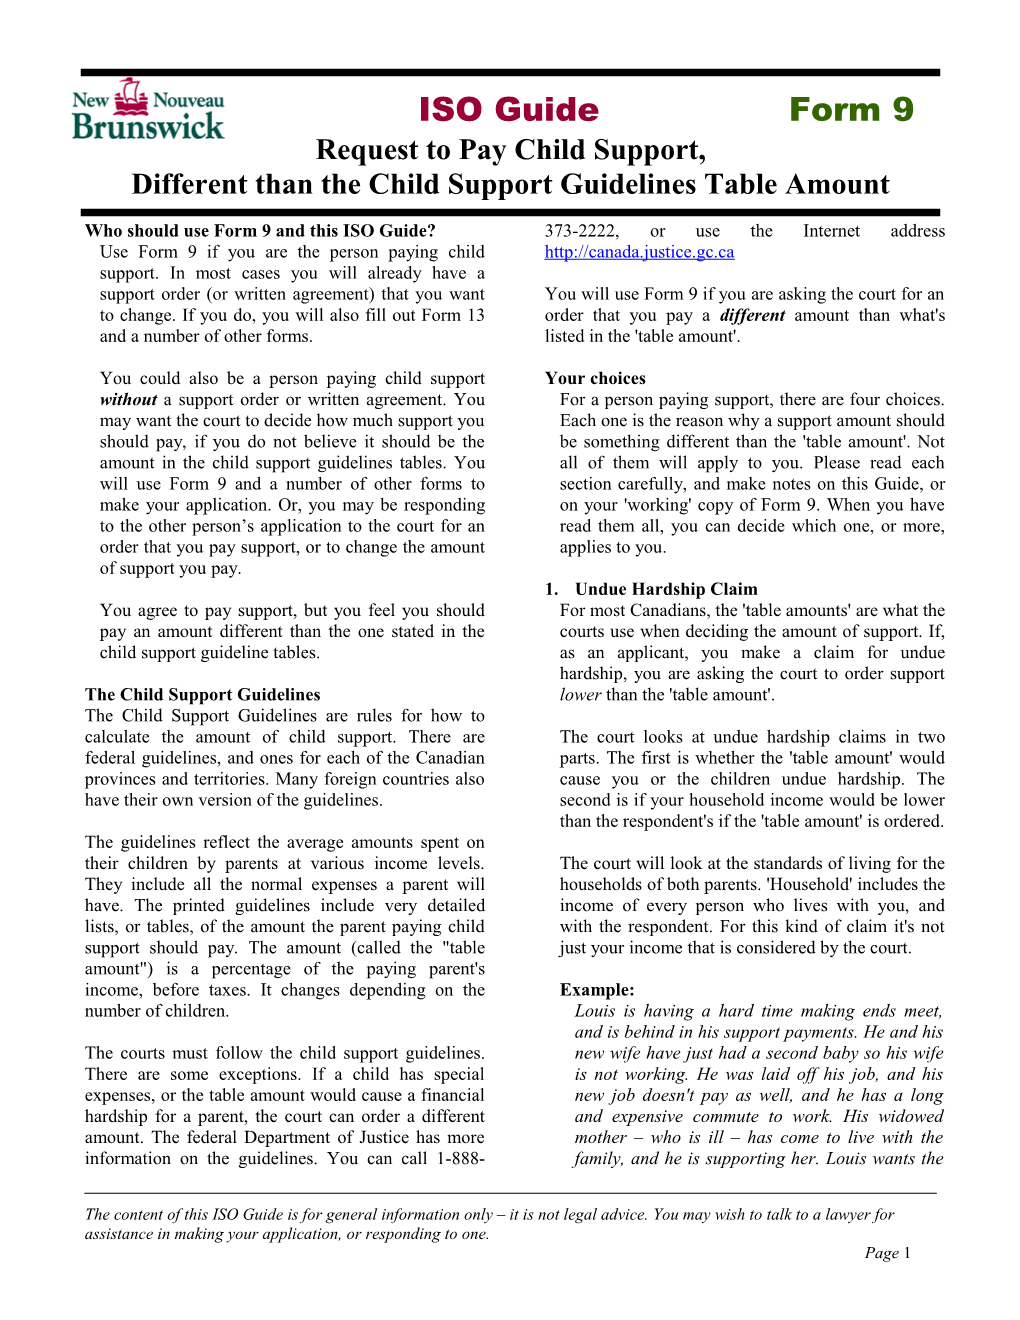 Different Than the Child Support Guidelines Table Amount